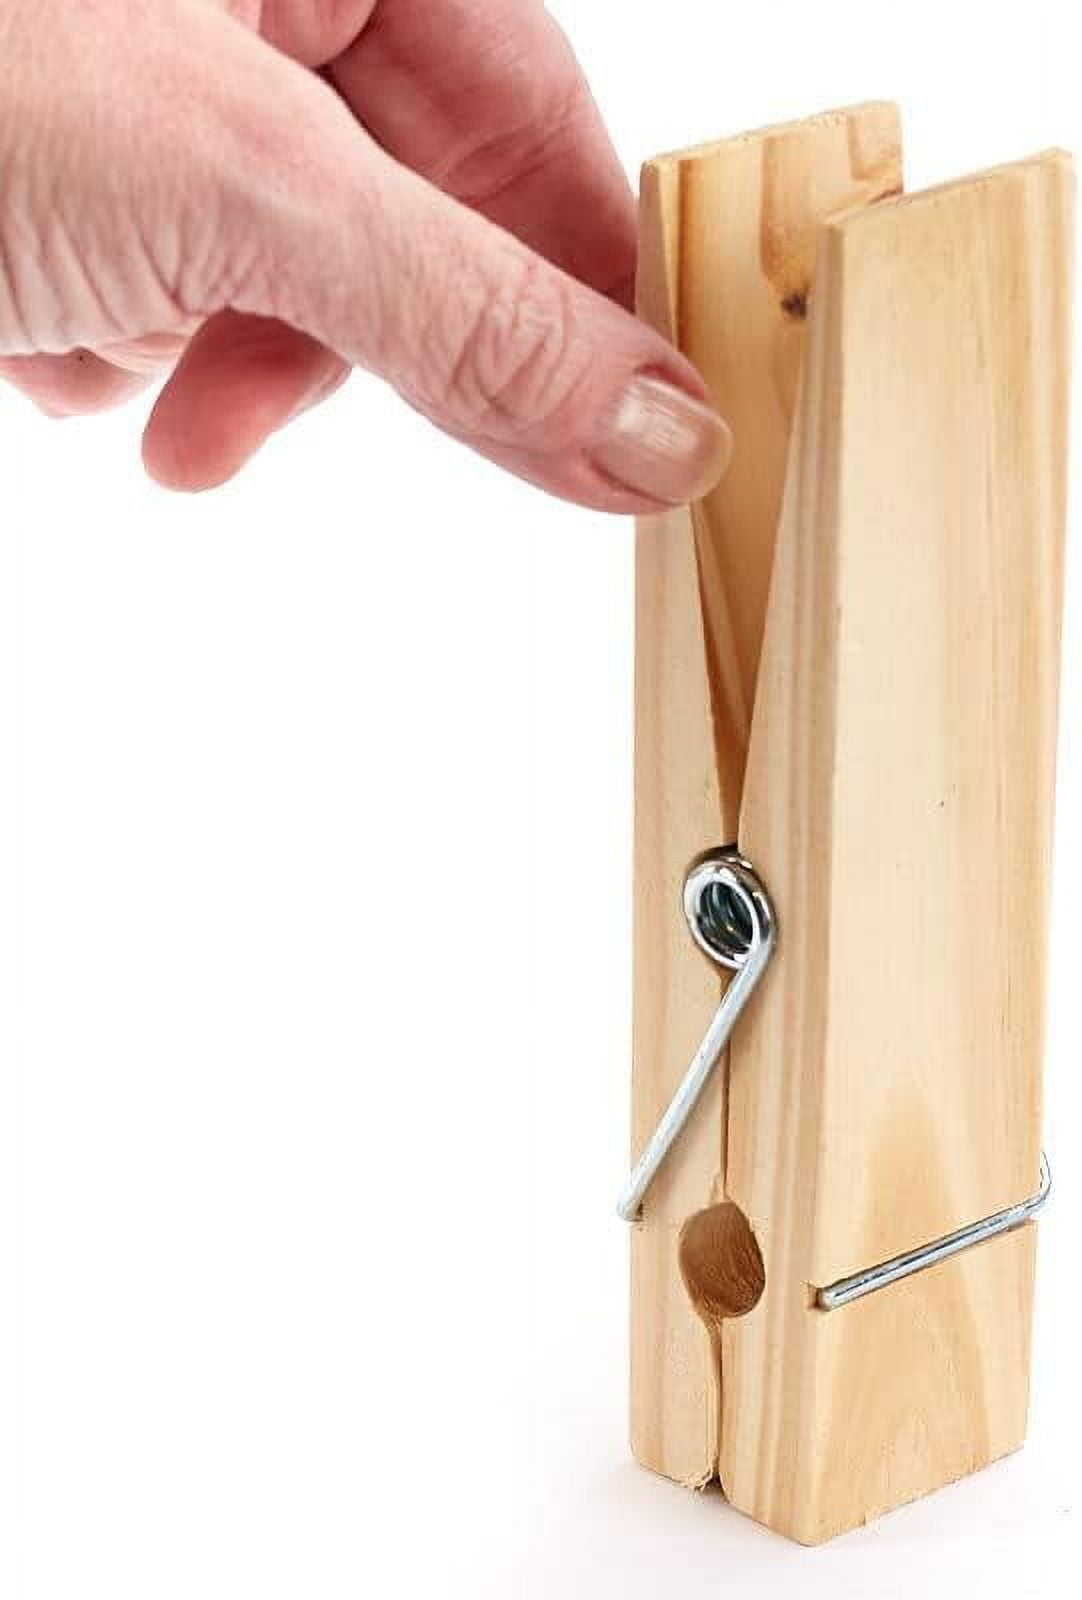 Buy Giant clothespins, wood online at Modulor